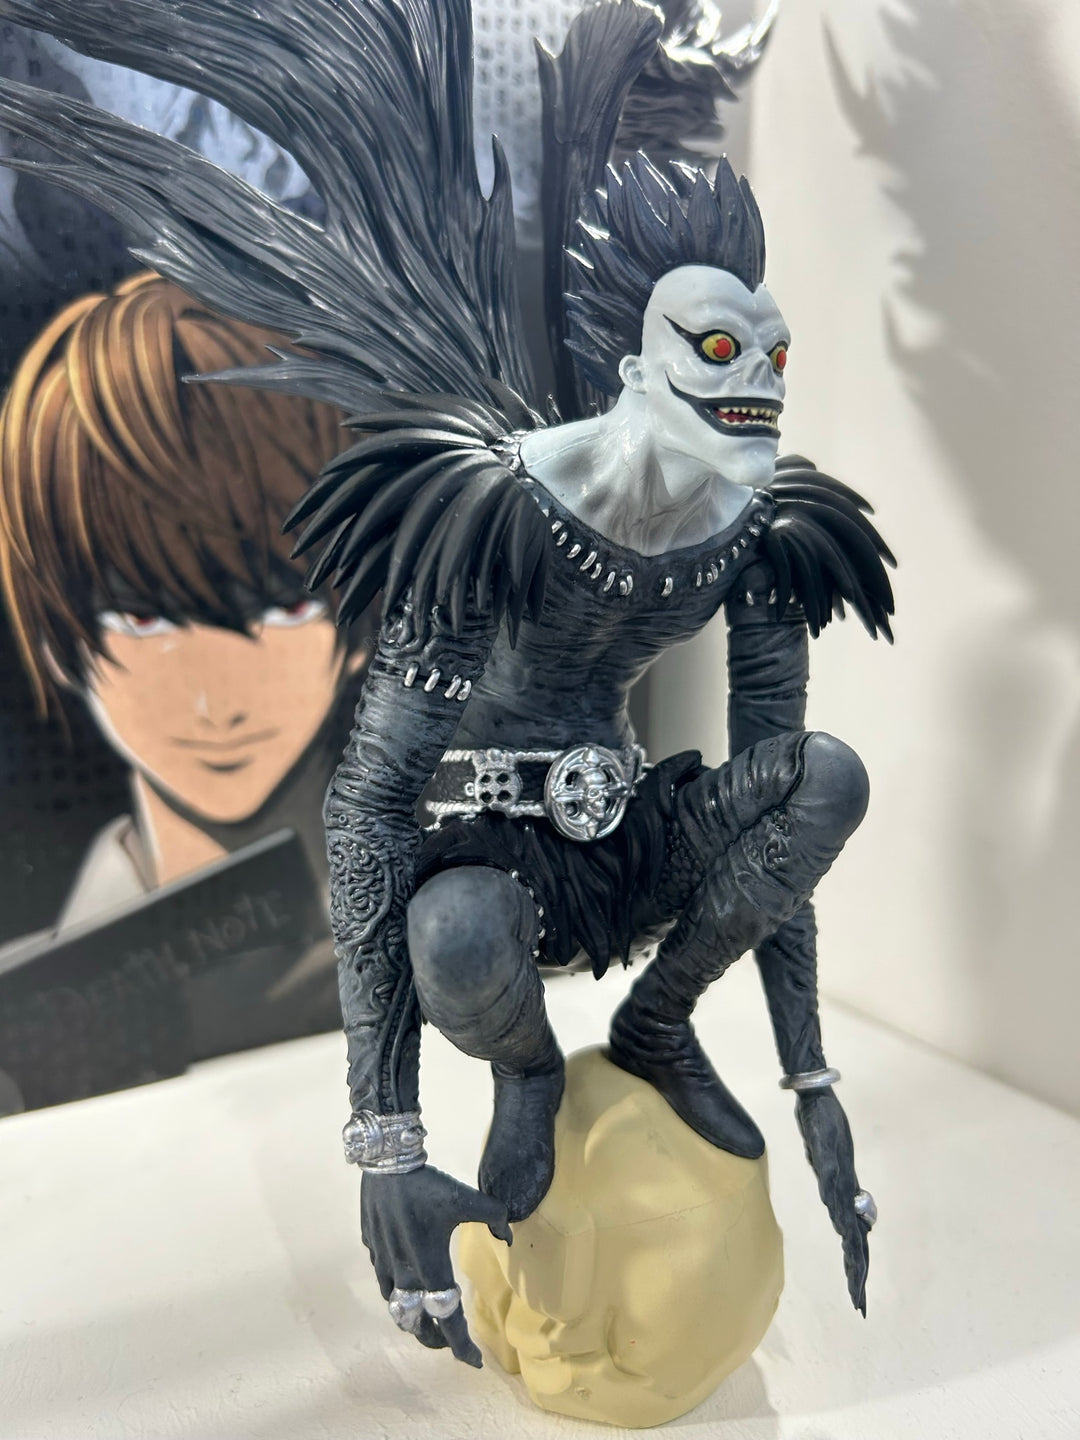 Meet Ryuk the most famous Shinigami in Death Note